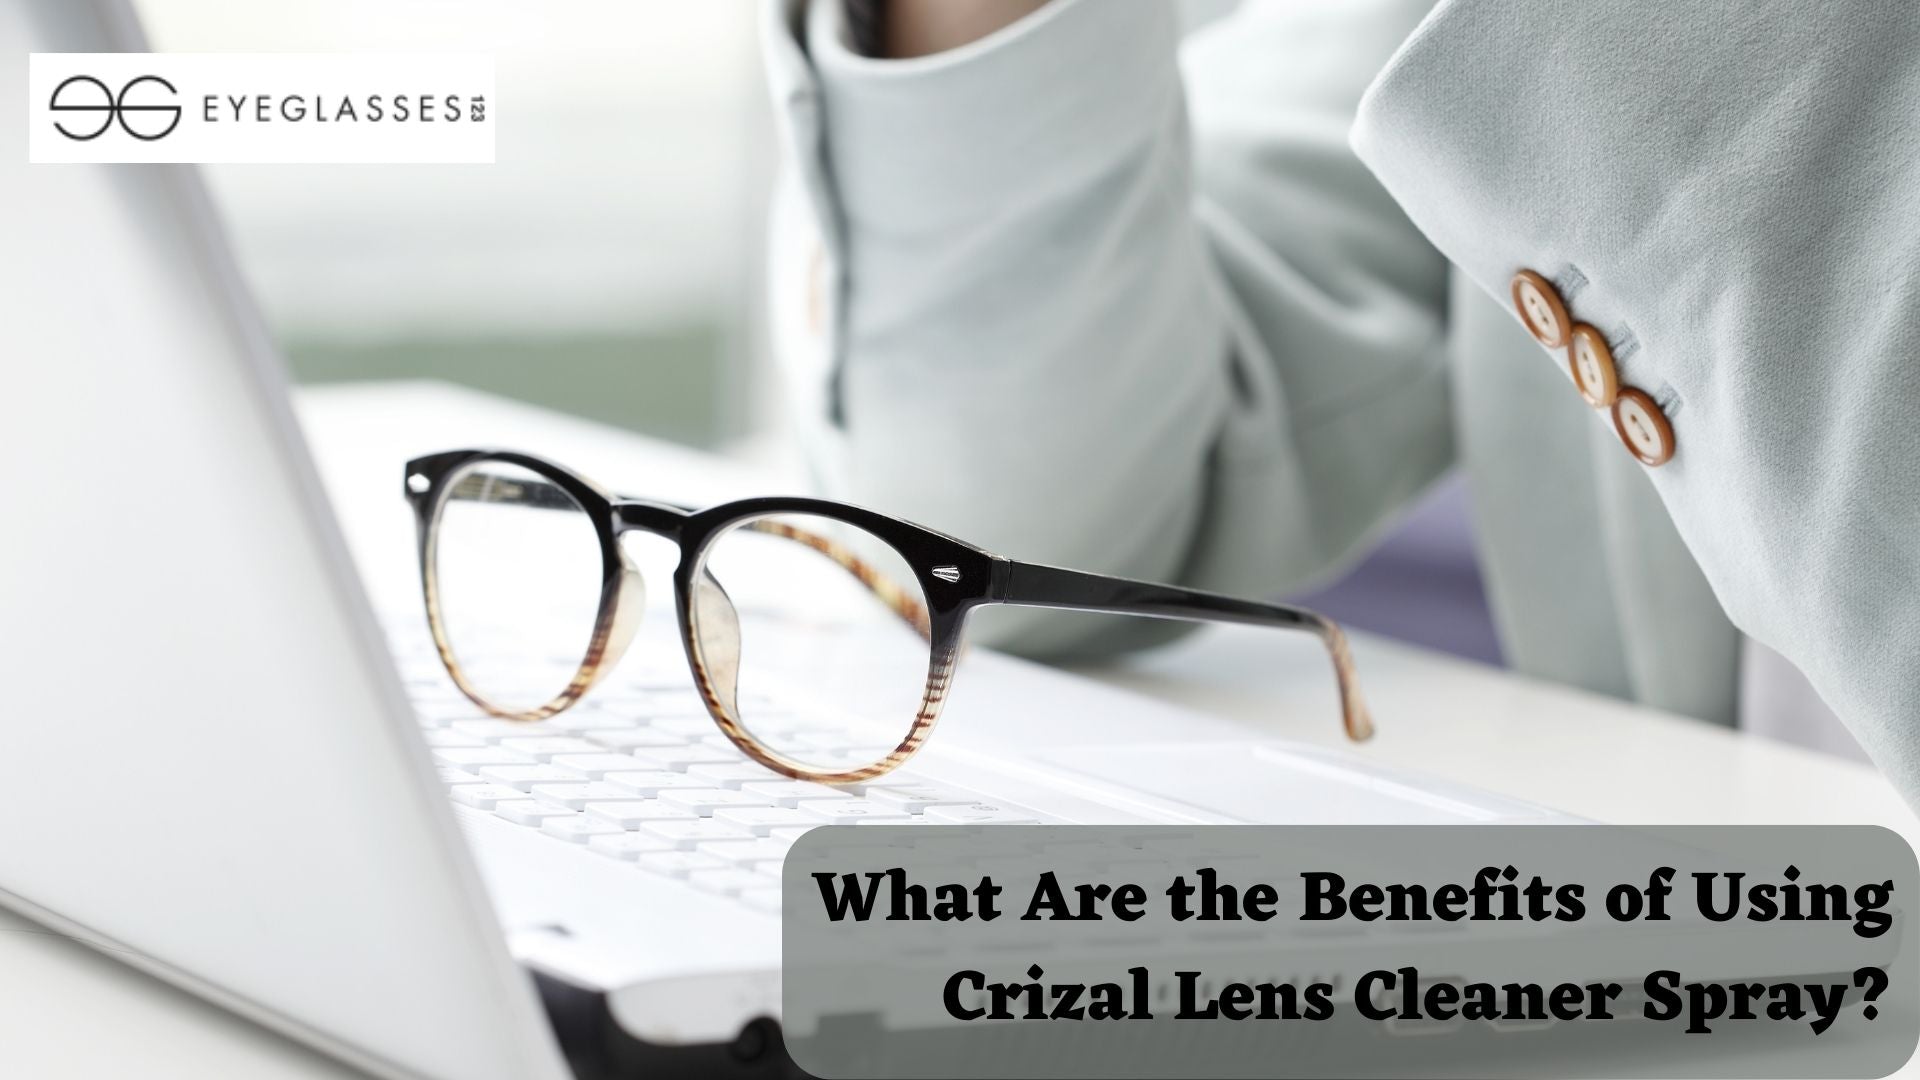 What Are the Benefits of Using Crizal Lens Cleaner Spray?